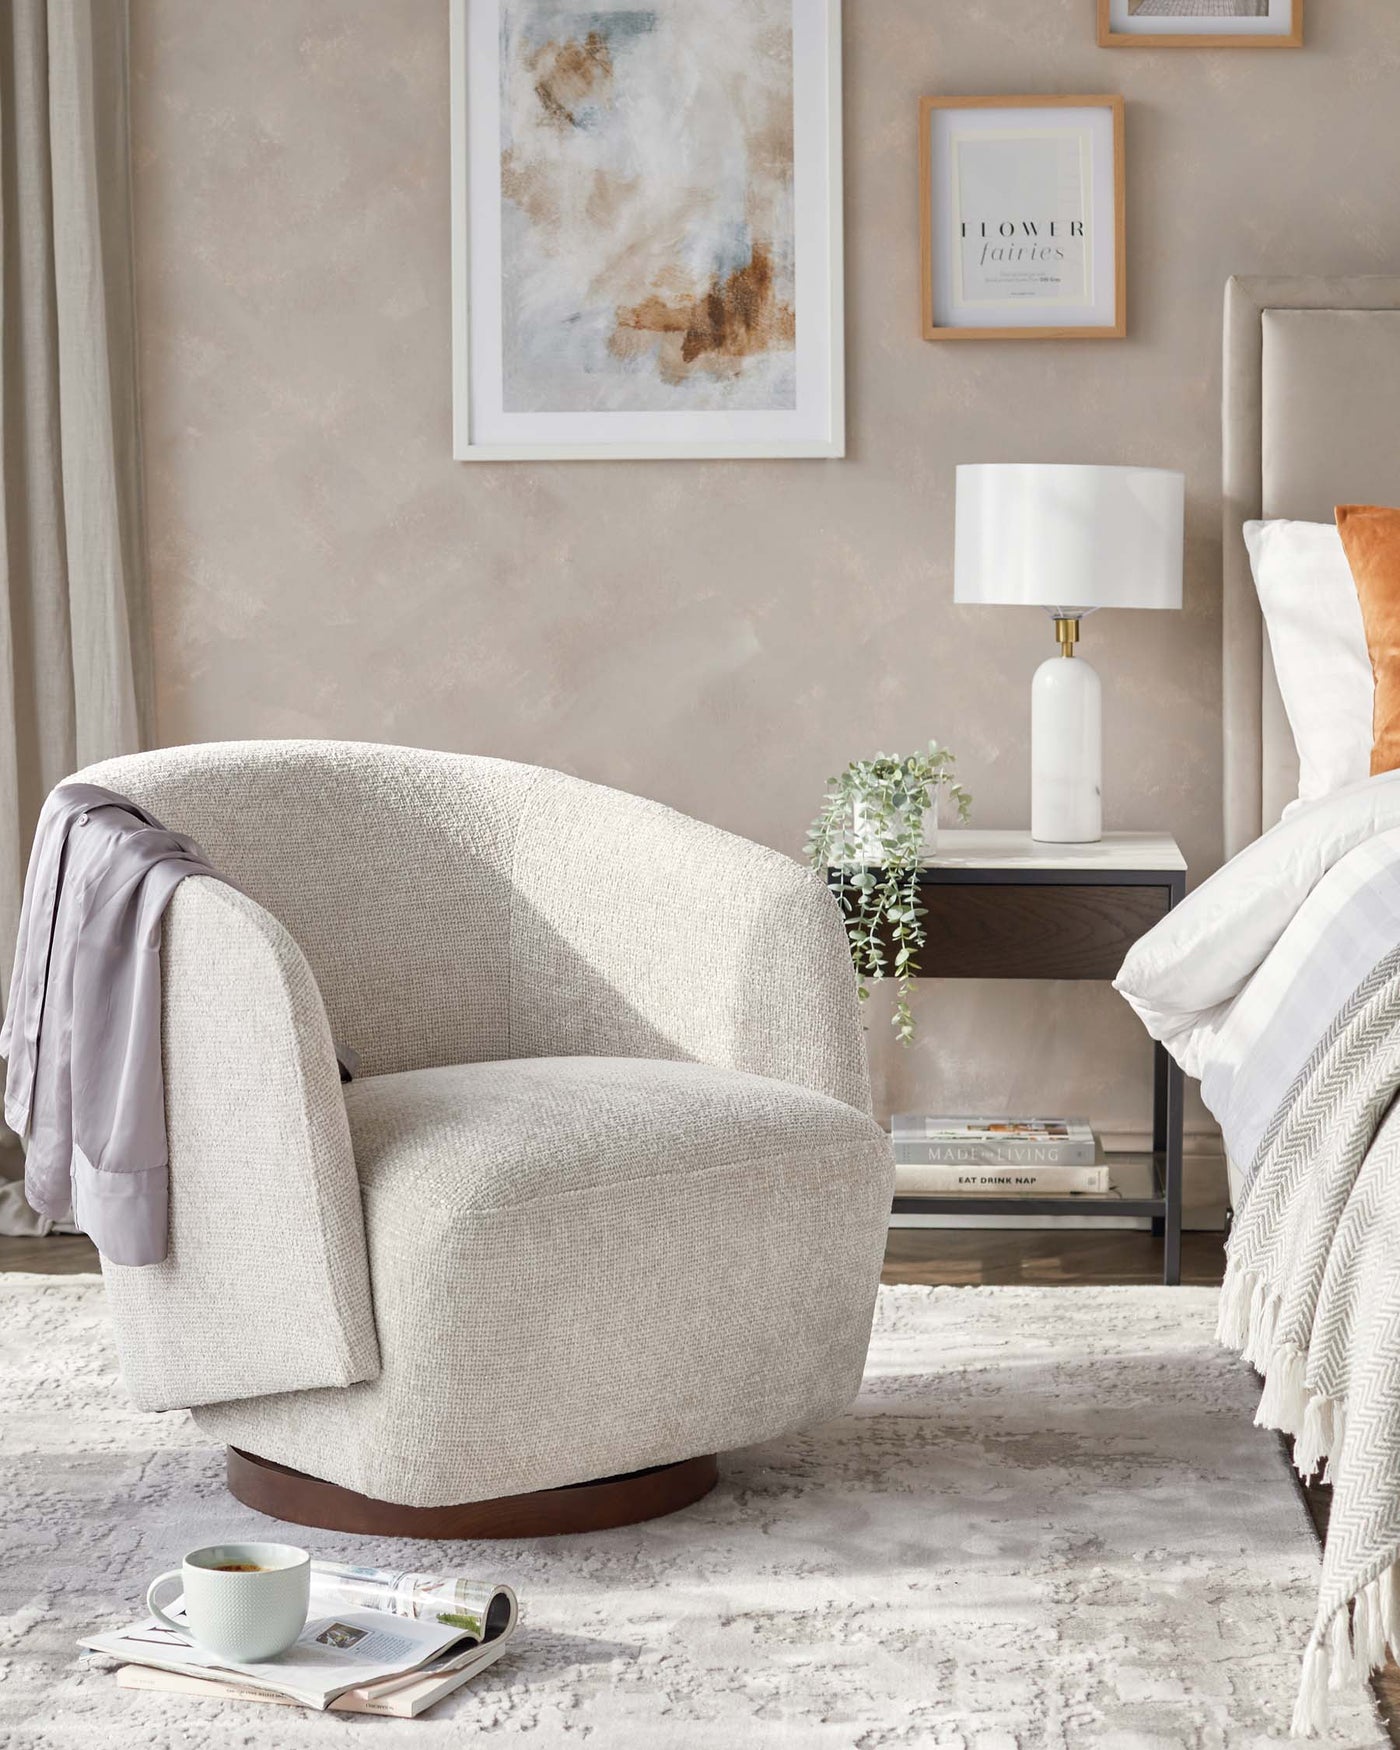 A contemporary beige upholstered swivel chair with a rounded design and a dark wooden base, accompanied by a modern white side table featuring a lower shelf, topped with a textured white lamp with a cylindrical shade. The setting includes a cosy beige throw blanket and a decorative plant, bringing warmth to the stylish interior.